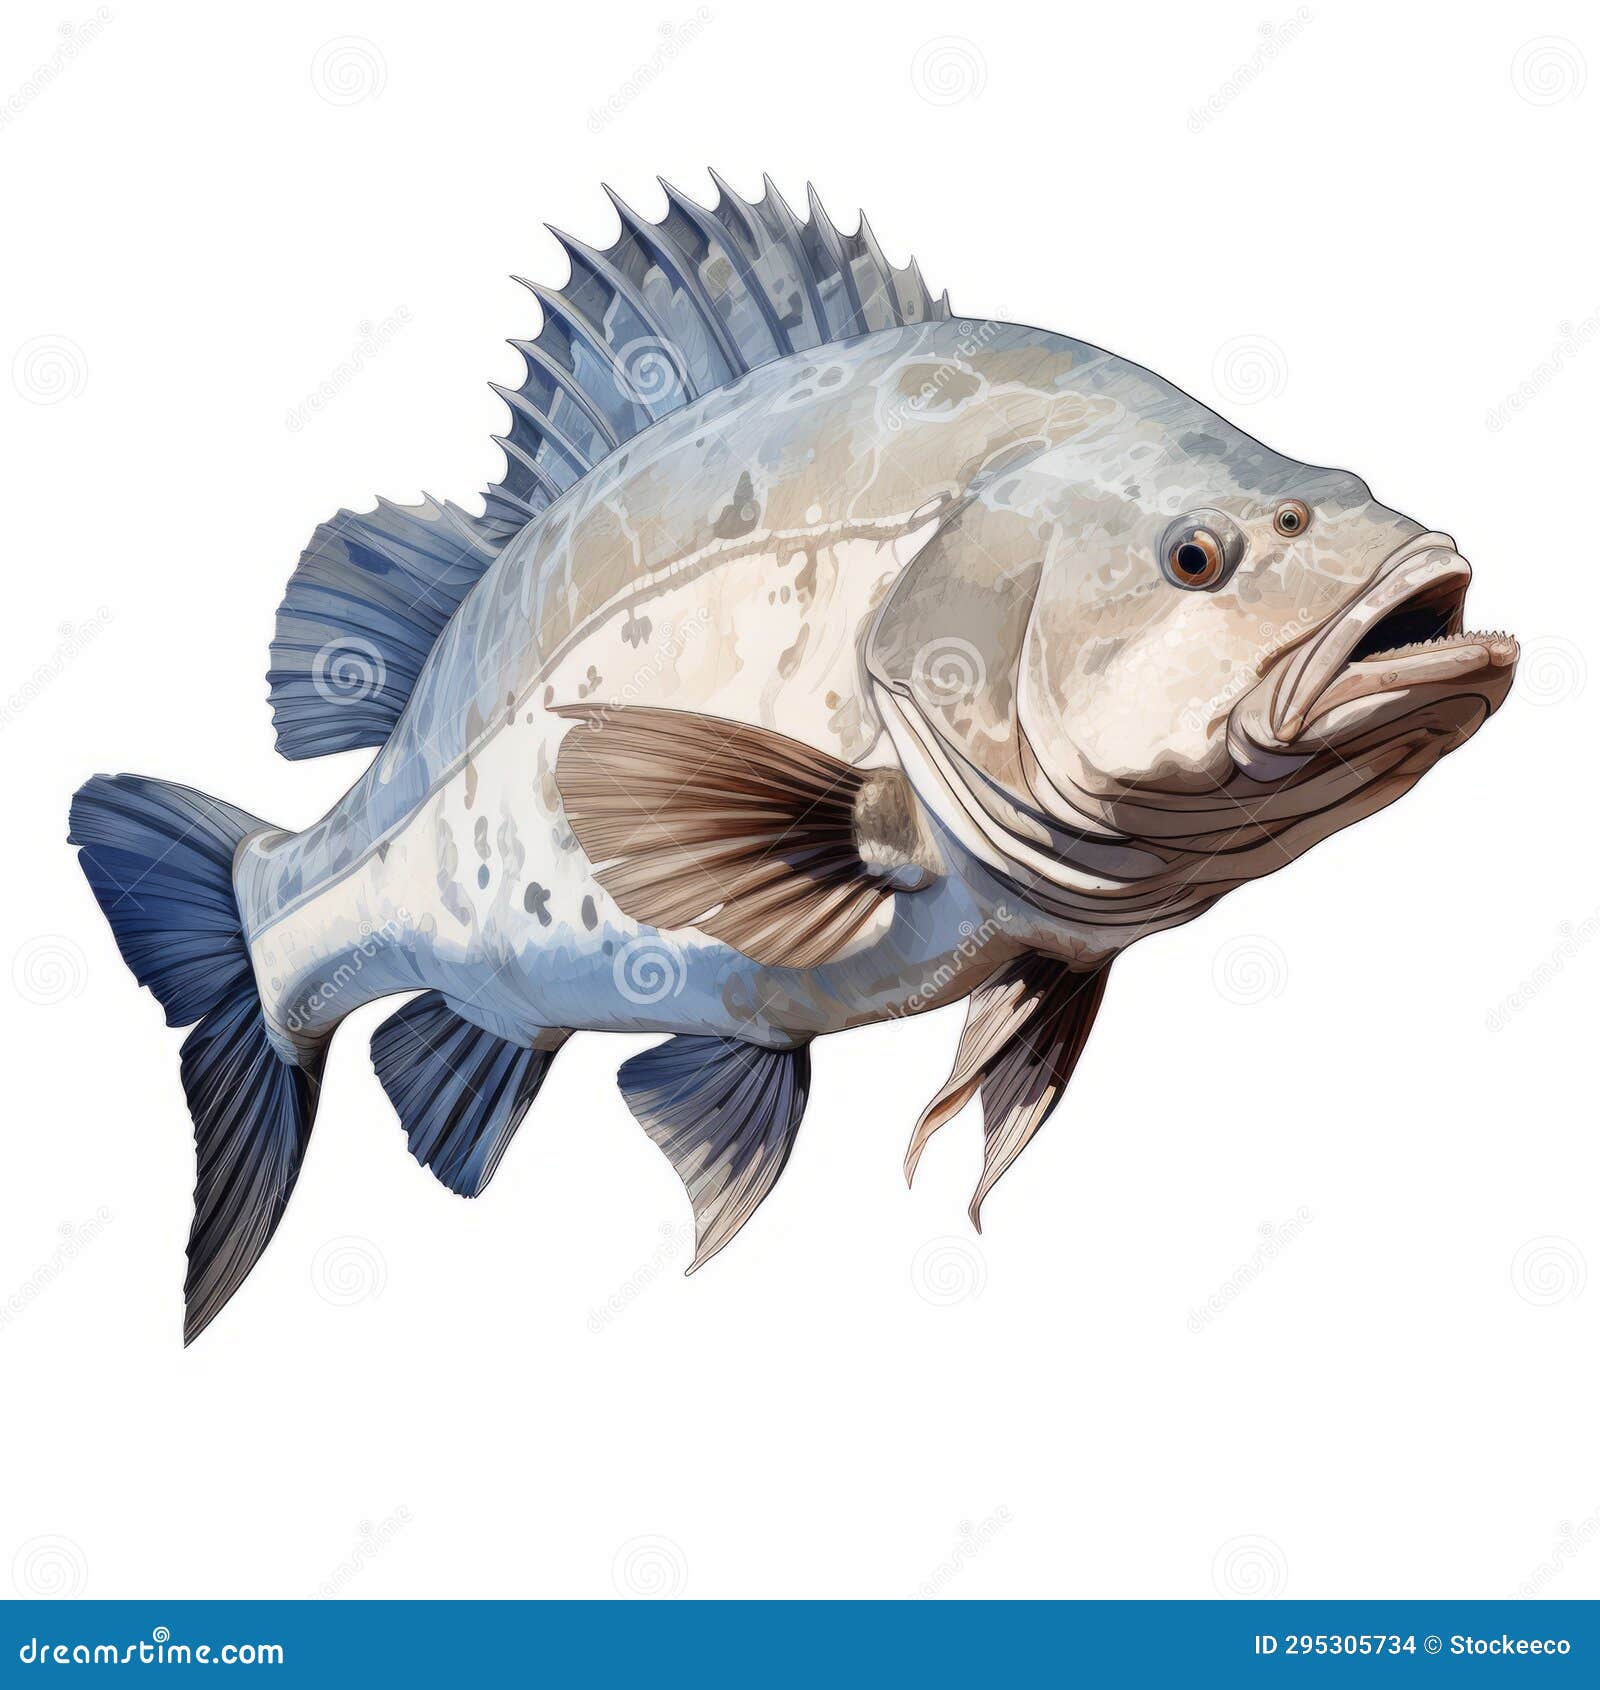 https://thumbs.dreamstime.com/z/hyperrealistic-illustration-enormous-swimming-halibut-fishing-rod-white-fish-doodle-drawing-depicted-295305734.jpg